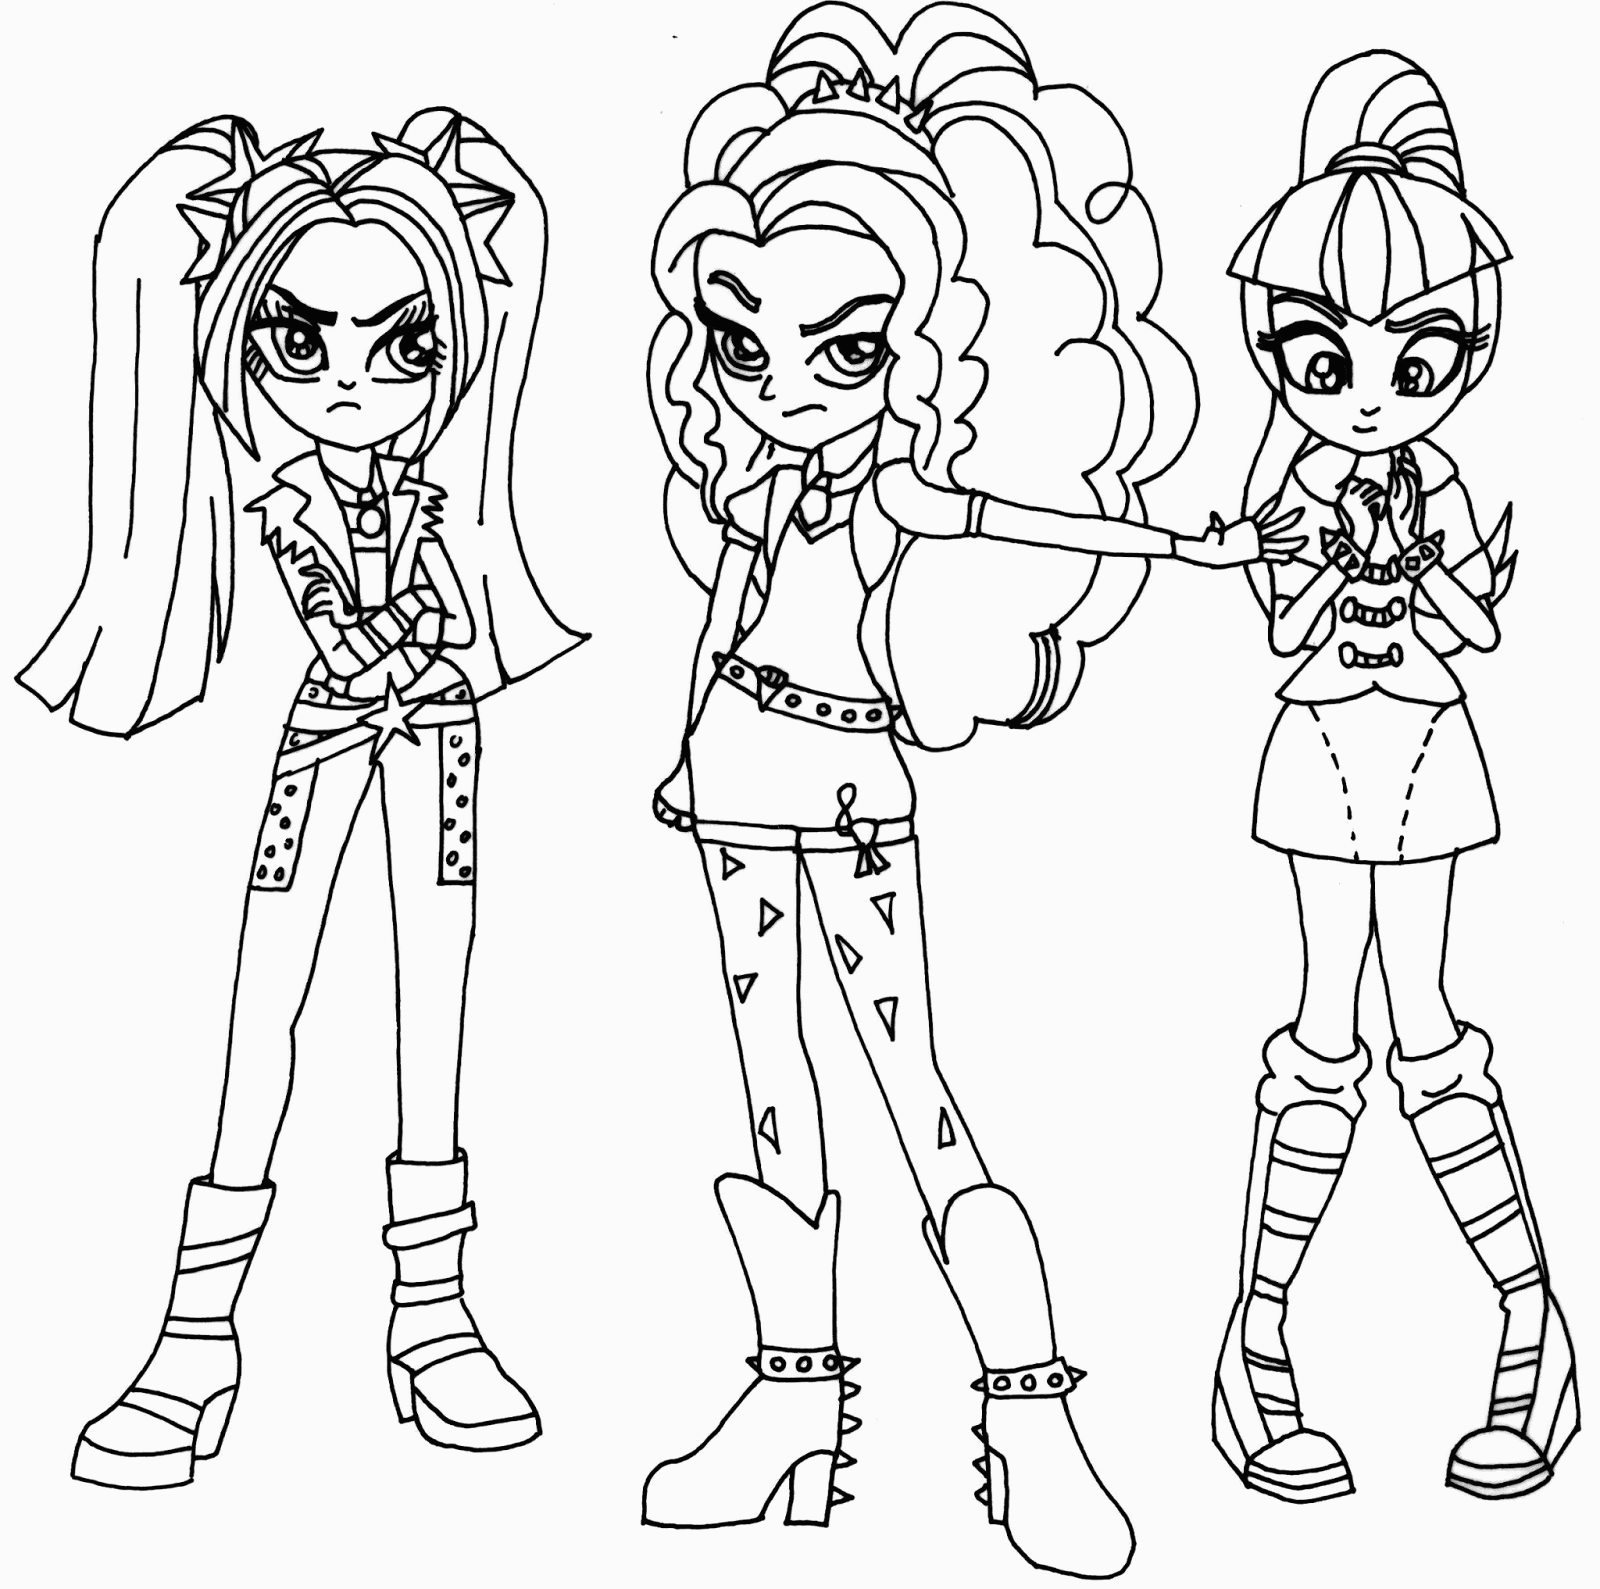  Equestria  Girls  Coloring  Pages  Best Coloring  Pages  For Kids